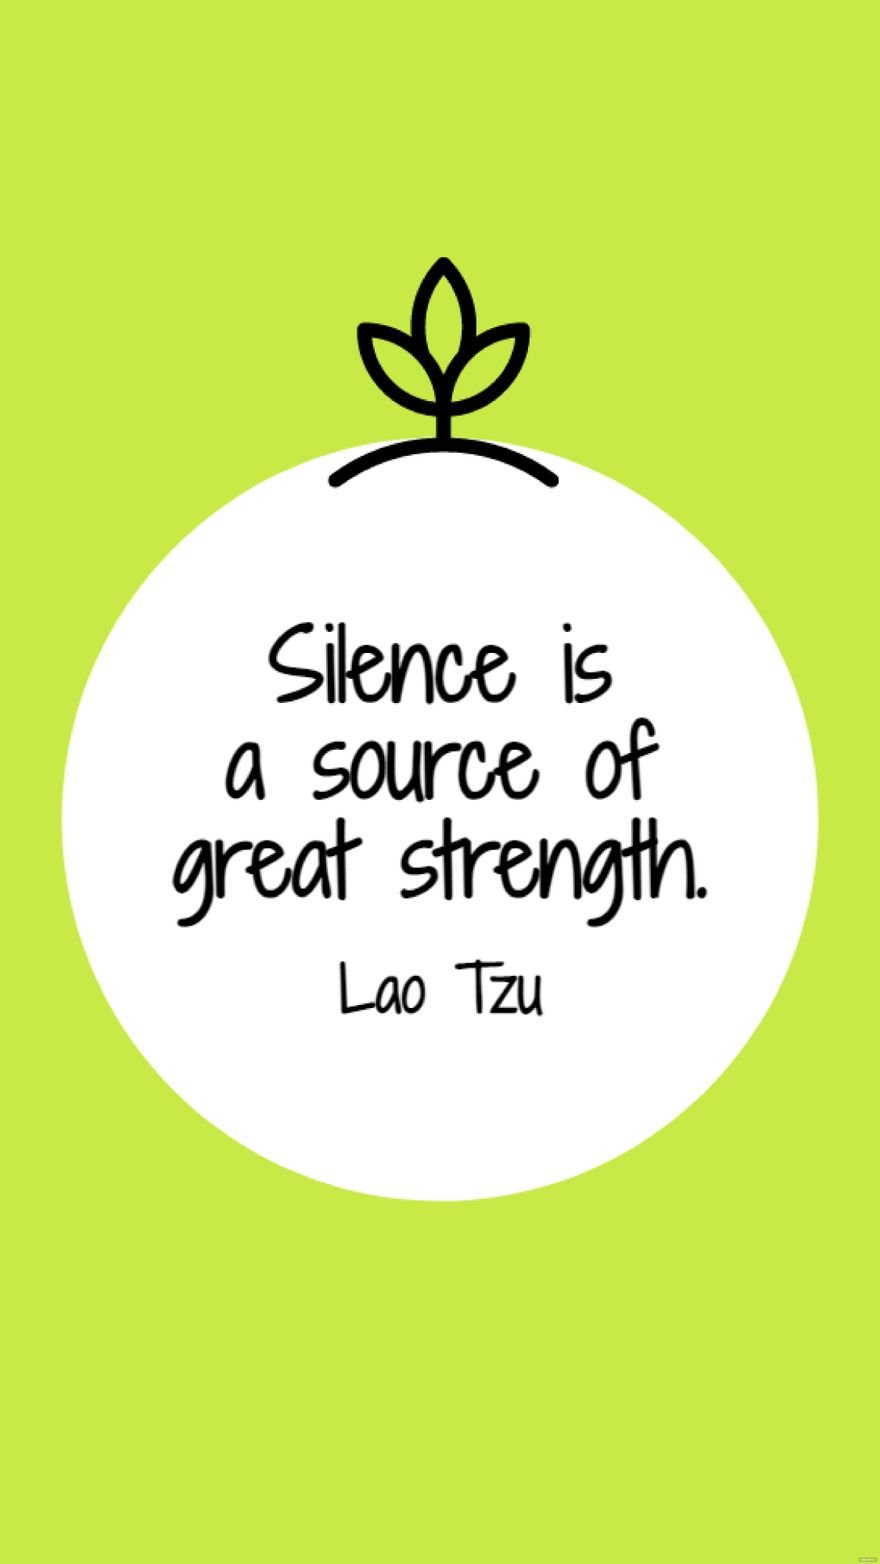 Lao Tzu - Silence is a source of great strength.